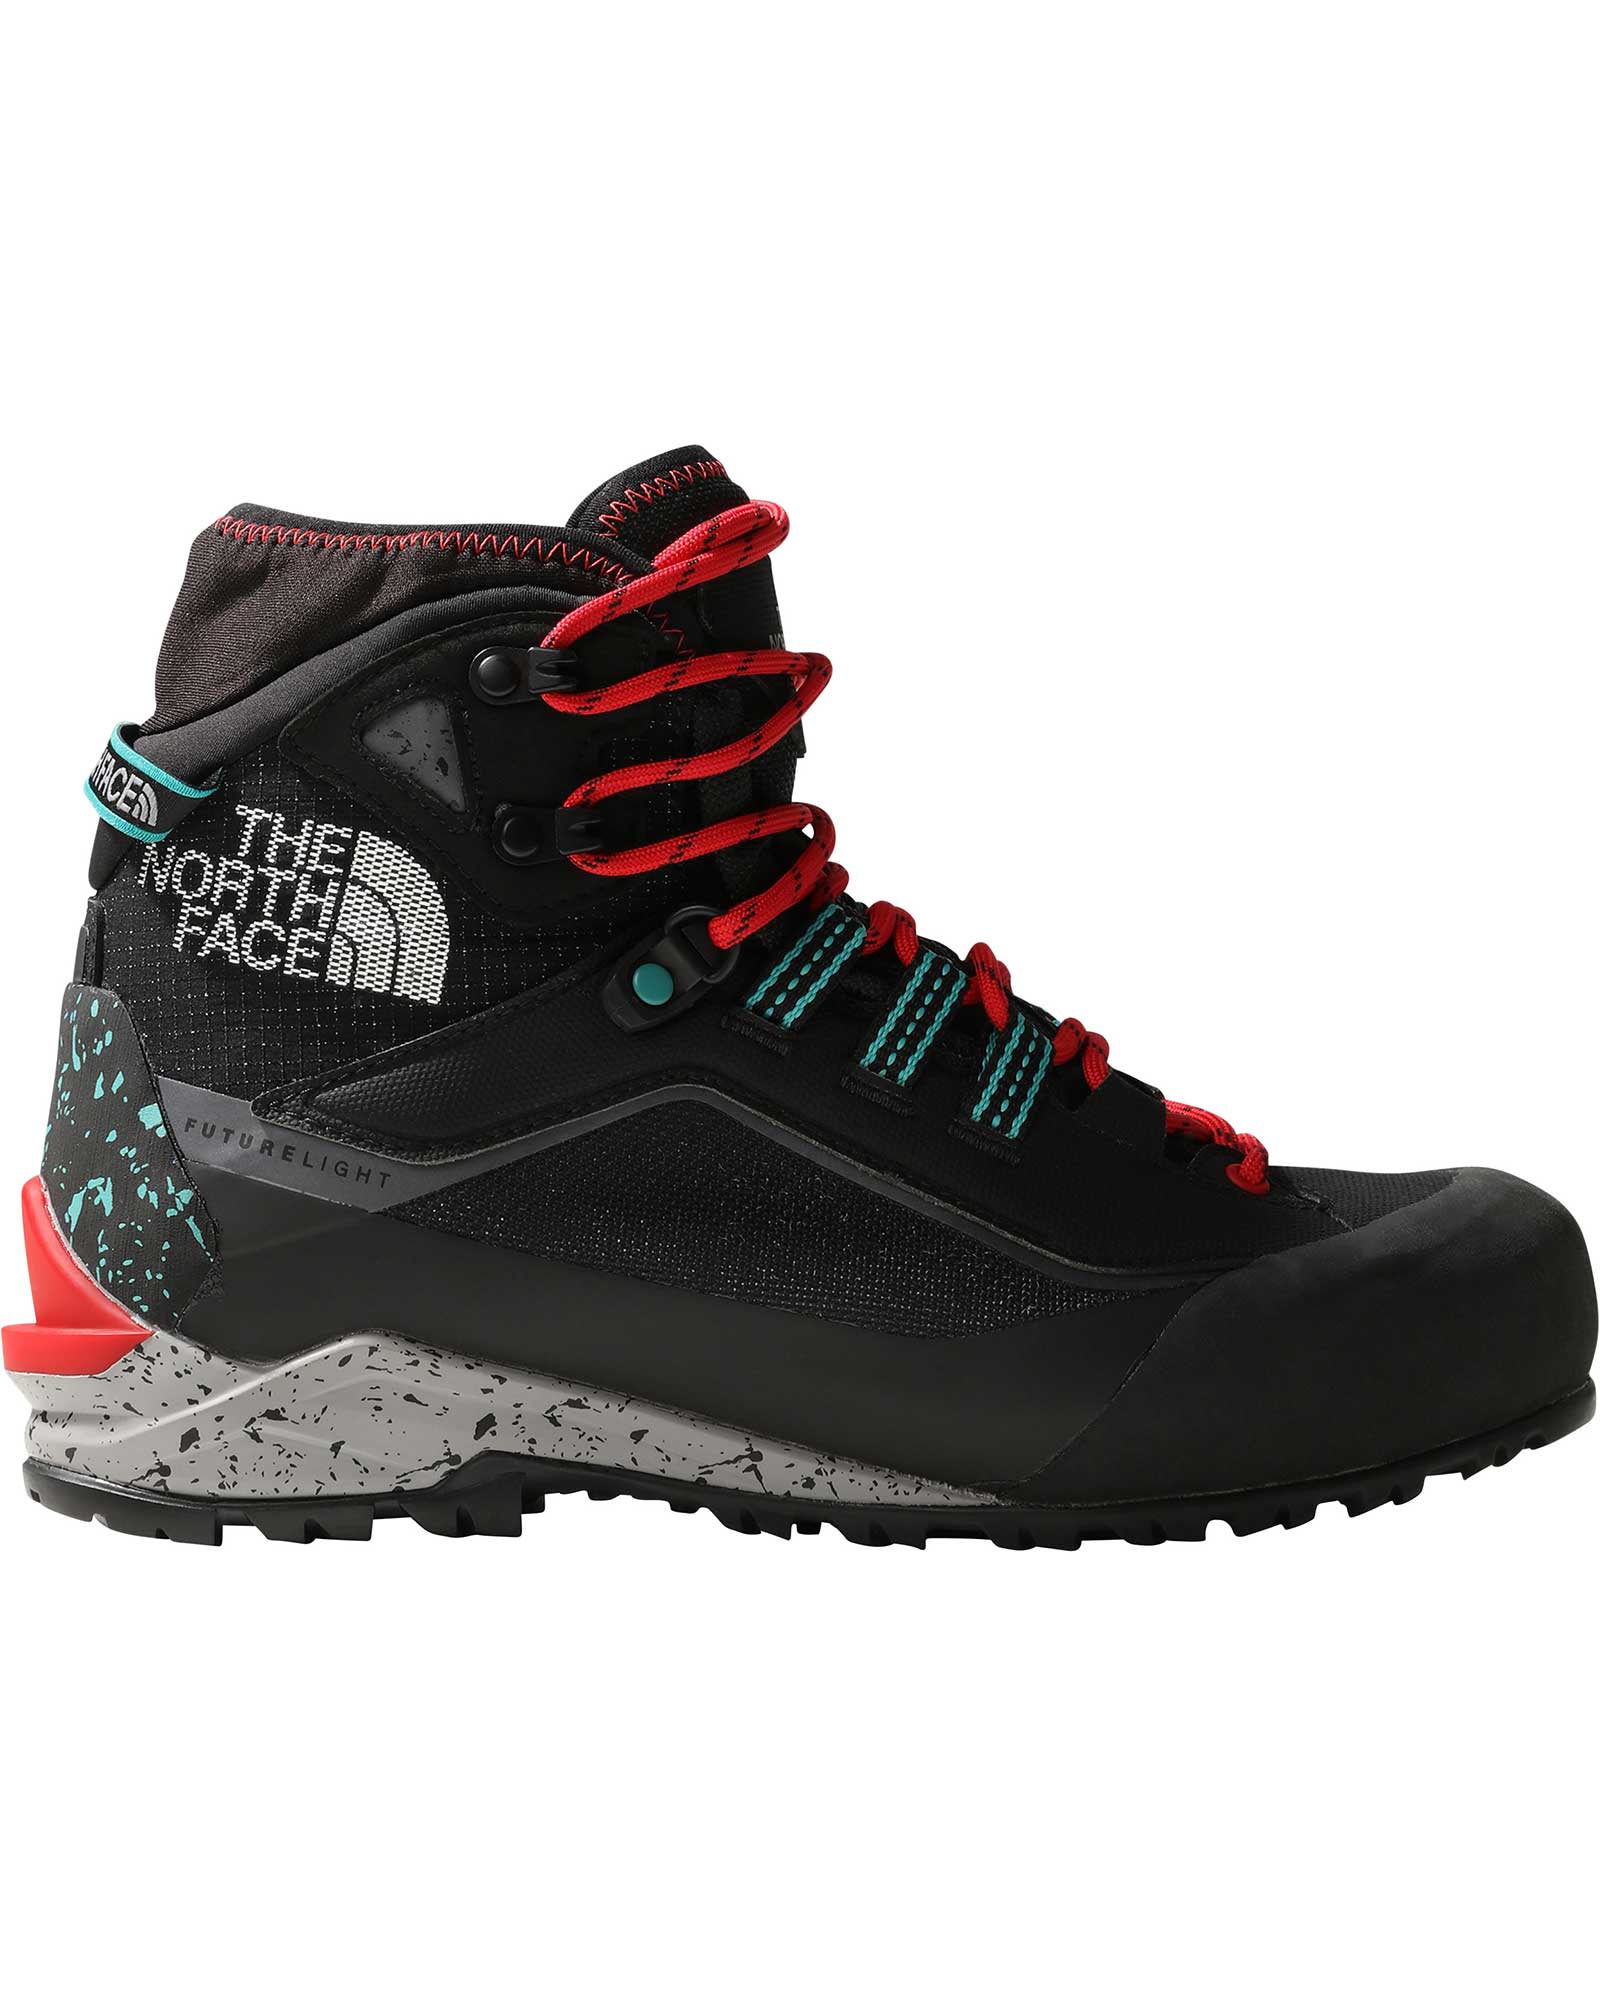 Product image of The North Face Summit Breithorn FUTUReLIGHT Women's Boots